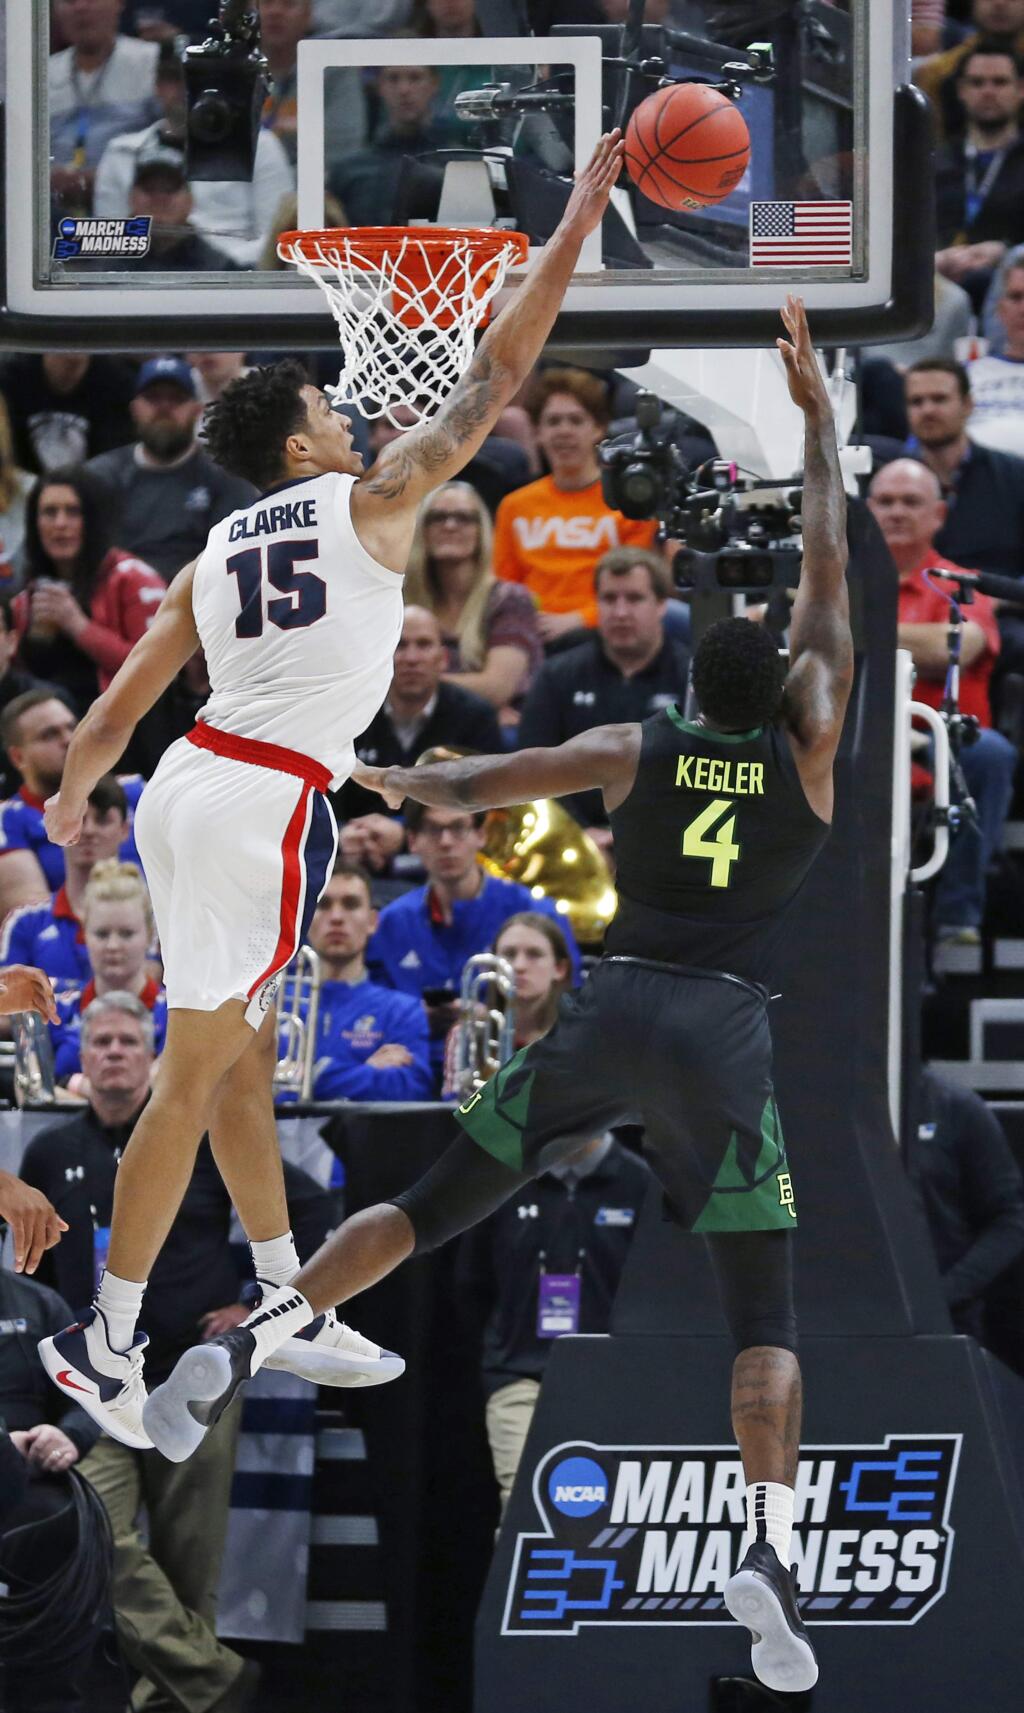 Gonzaga forward Brandon Clarke blocks the shot of Baylor guard Mario Kegler during the second half of a second-round game in the NCAA Tournament Saturday, March 23, 2019, in Salt Lake City. (AP Photo/Rick Bowmer)